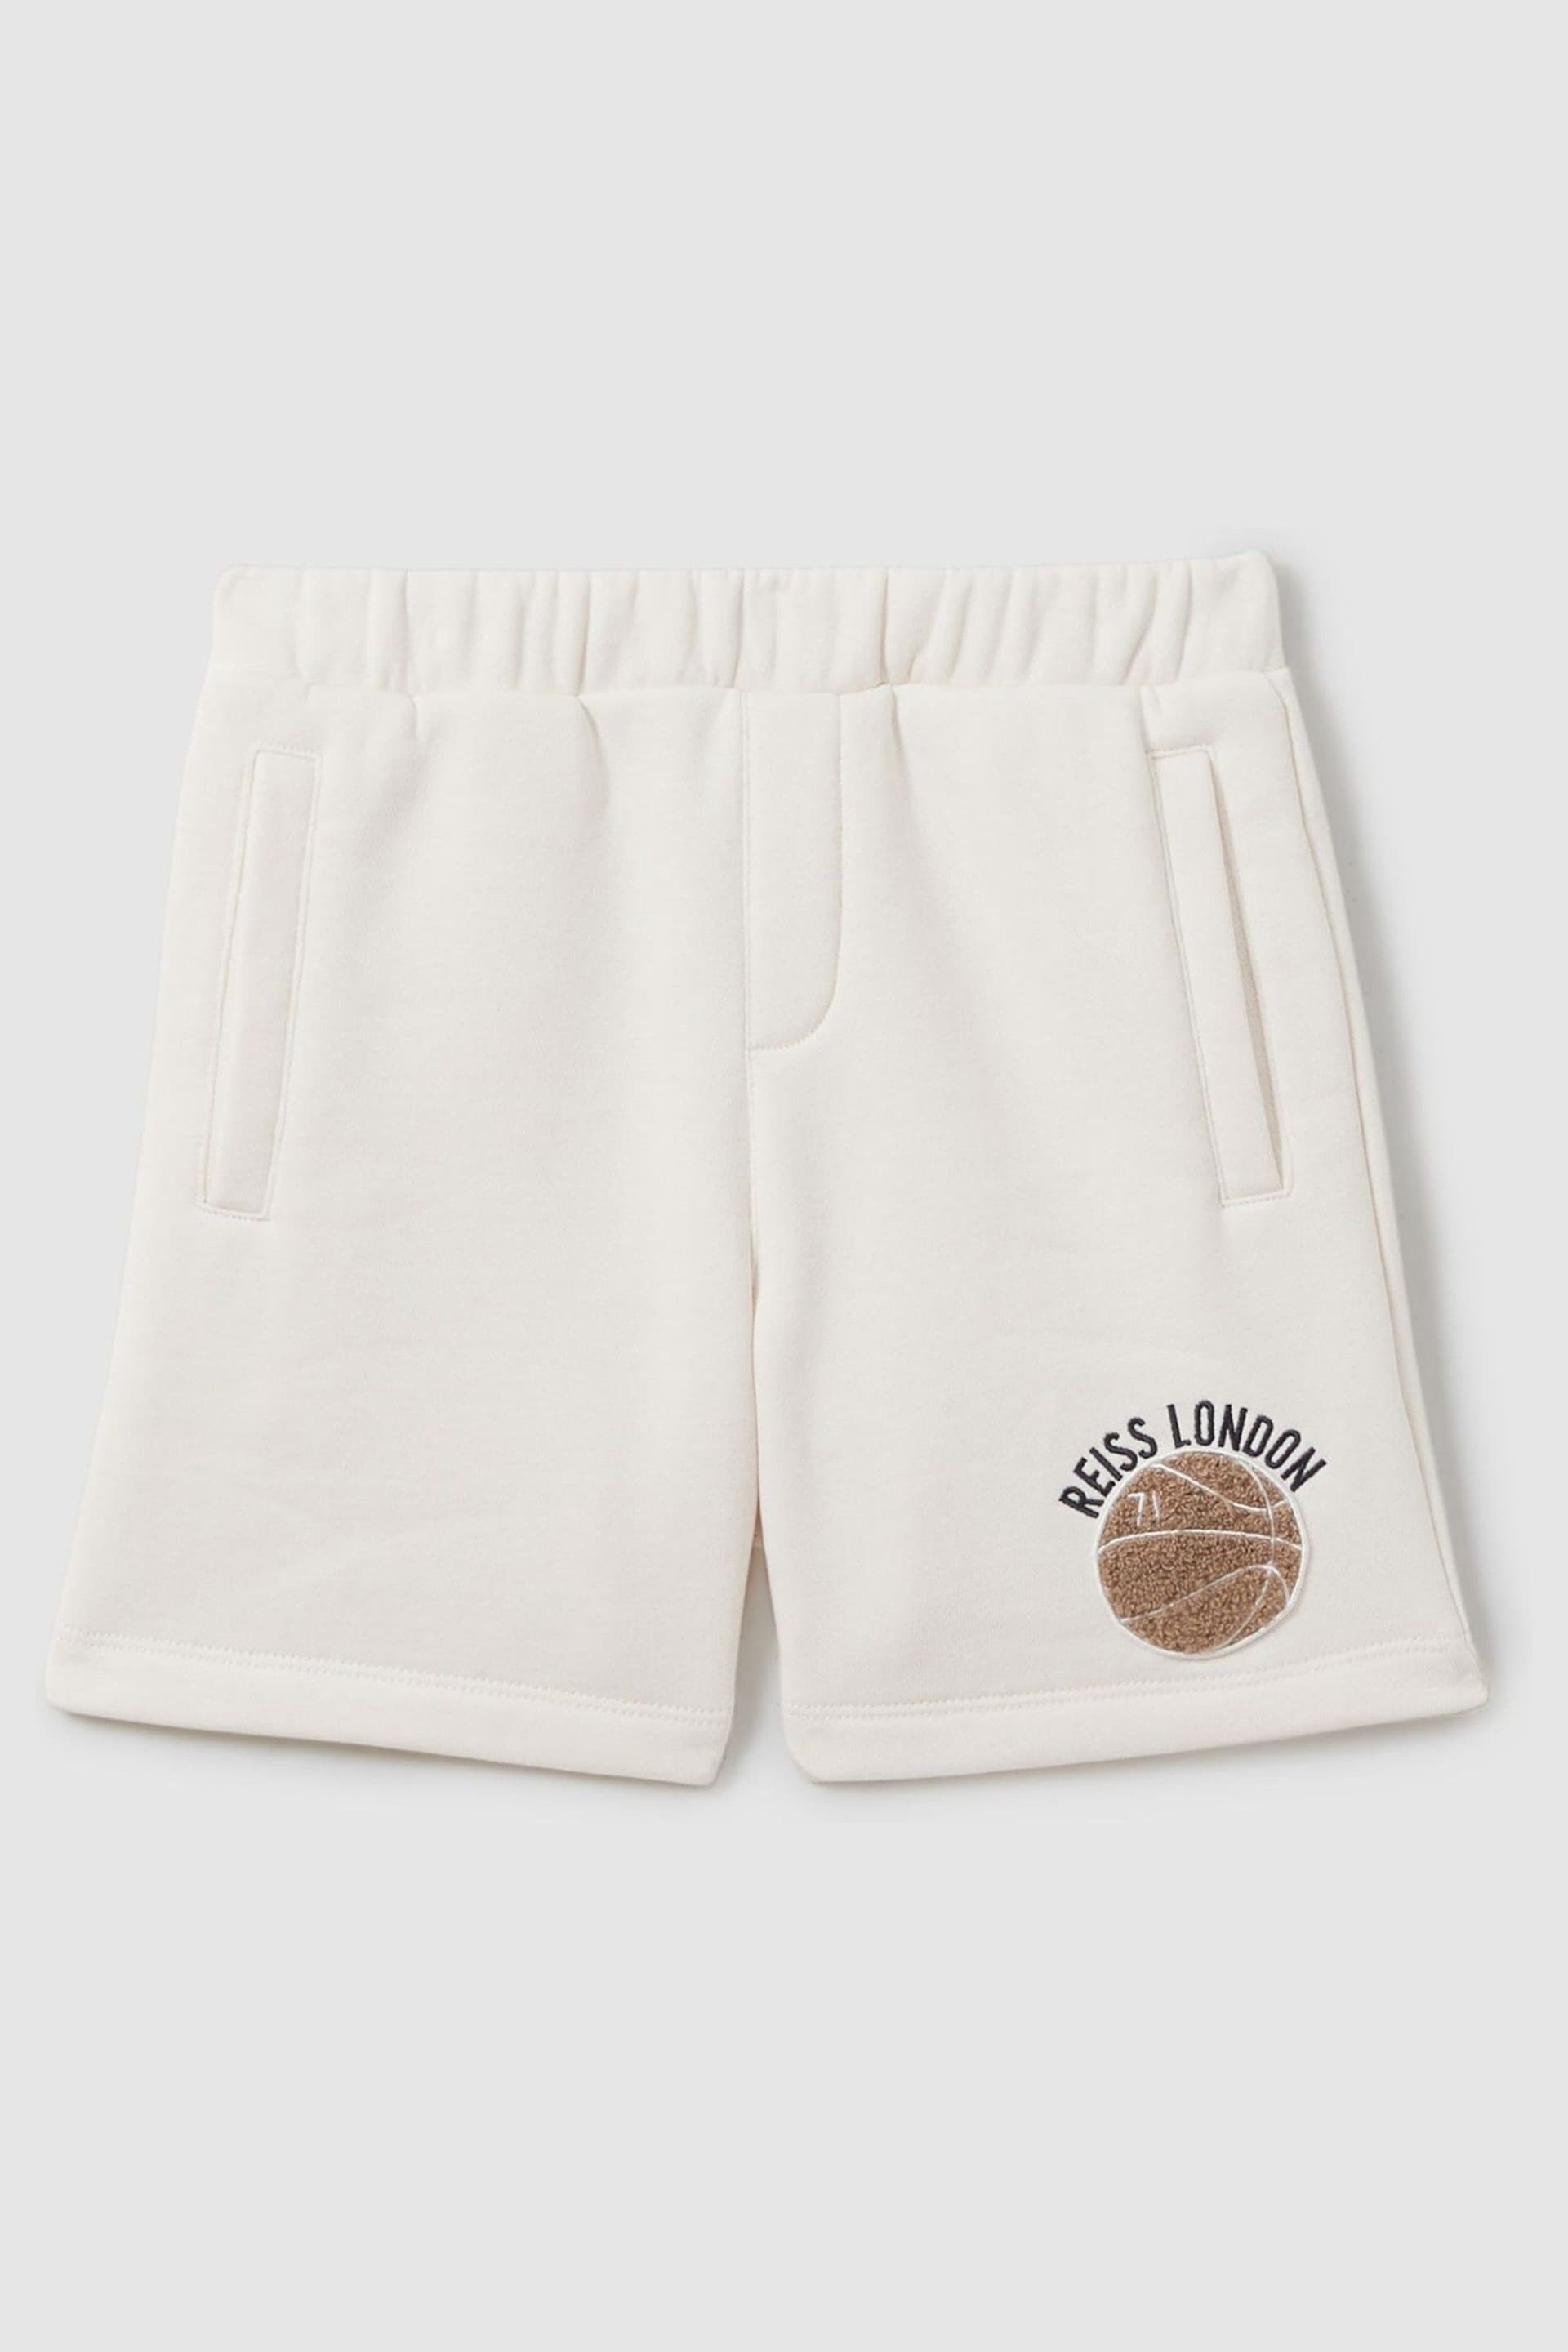 Reiss Off White Arto Junior Relaxed Embroidered Basketball Shorts - Image 2 of 4